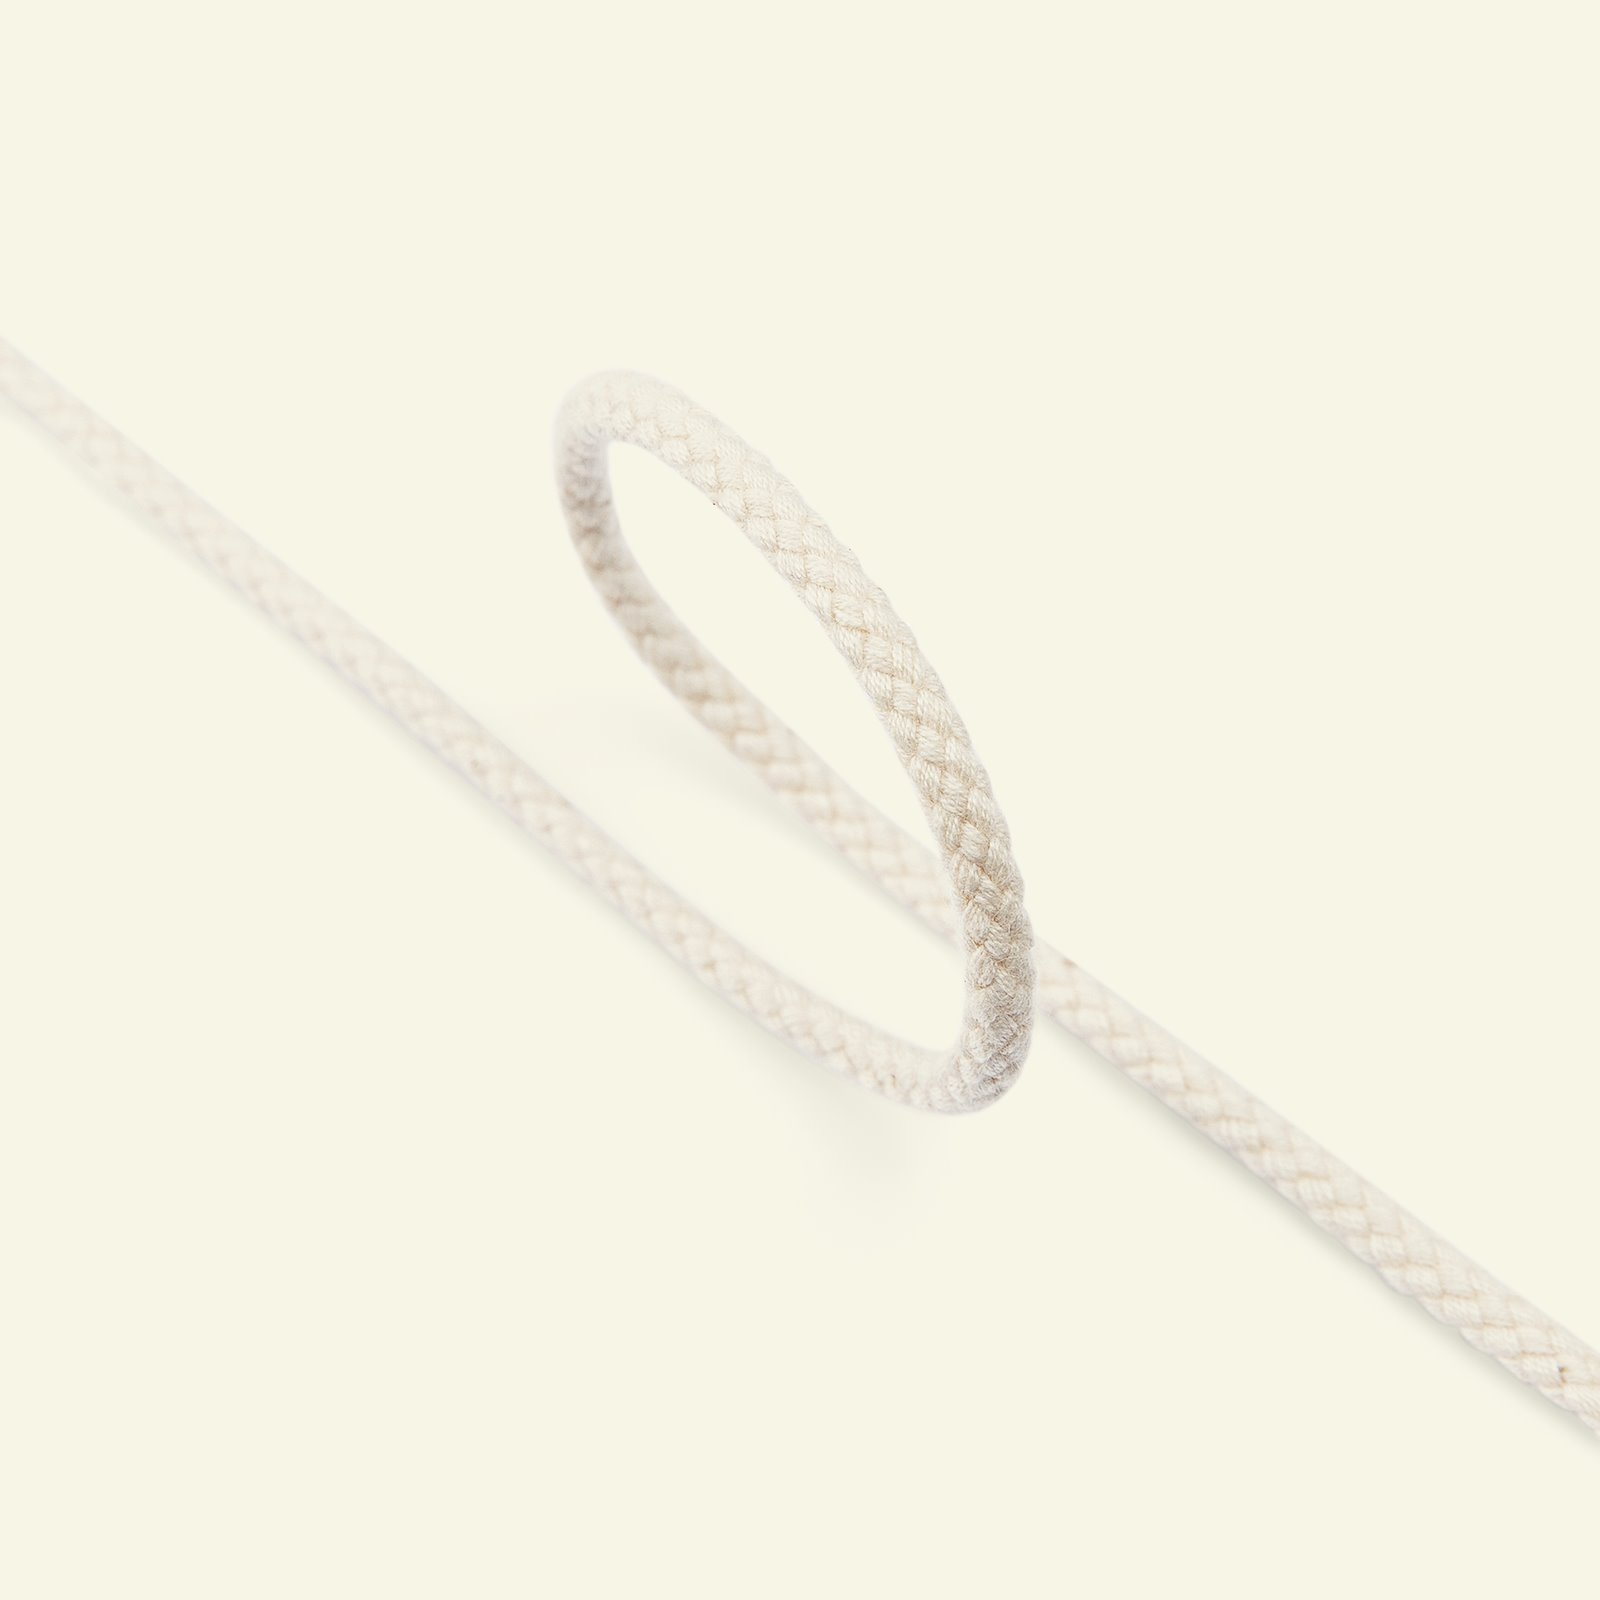 Anorak cord3,5 mm cotton unbleached 100m 75103_pack